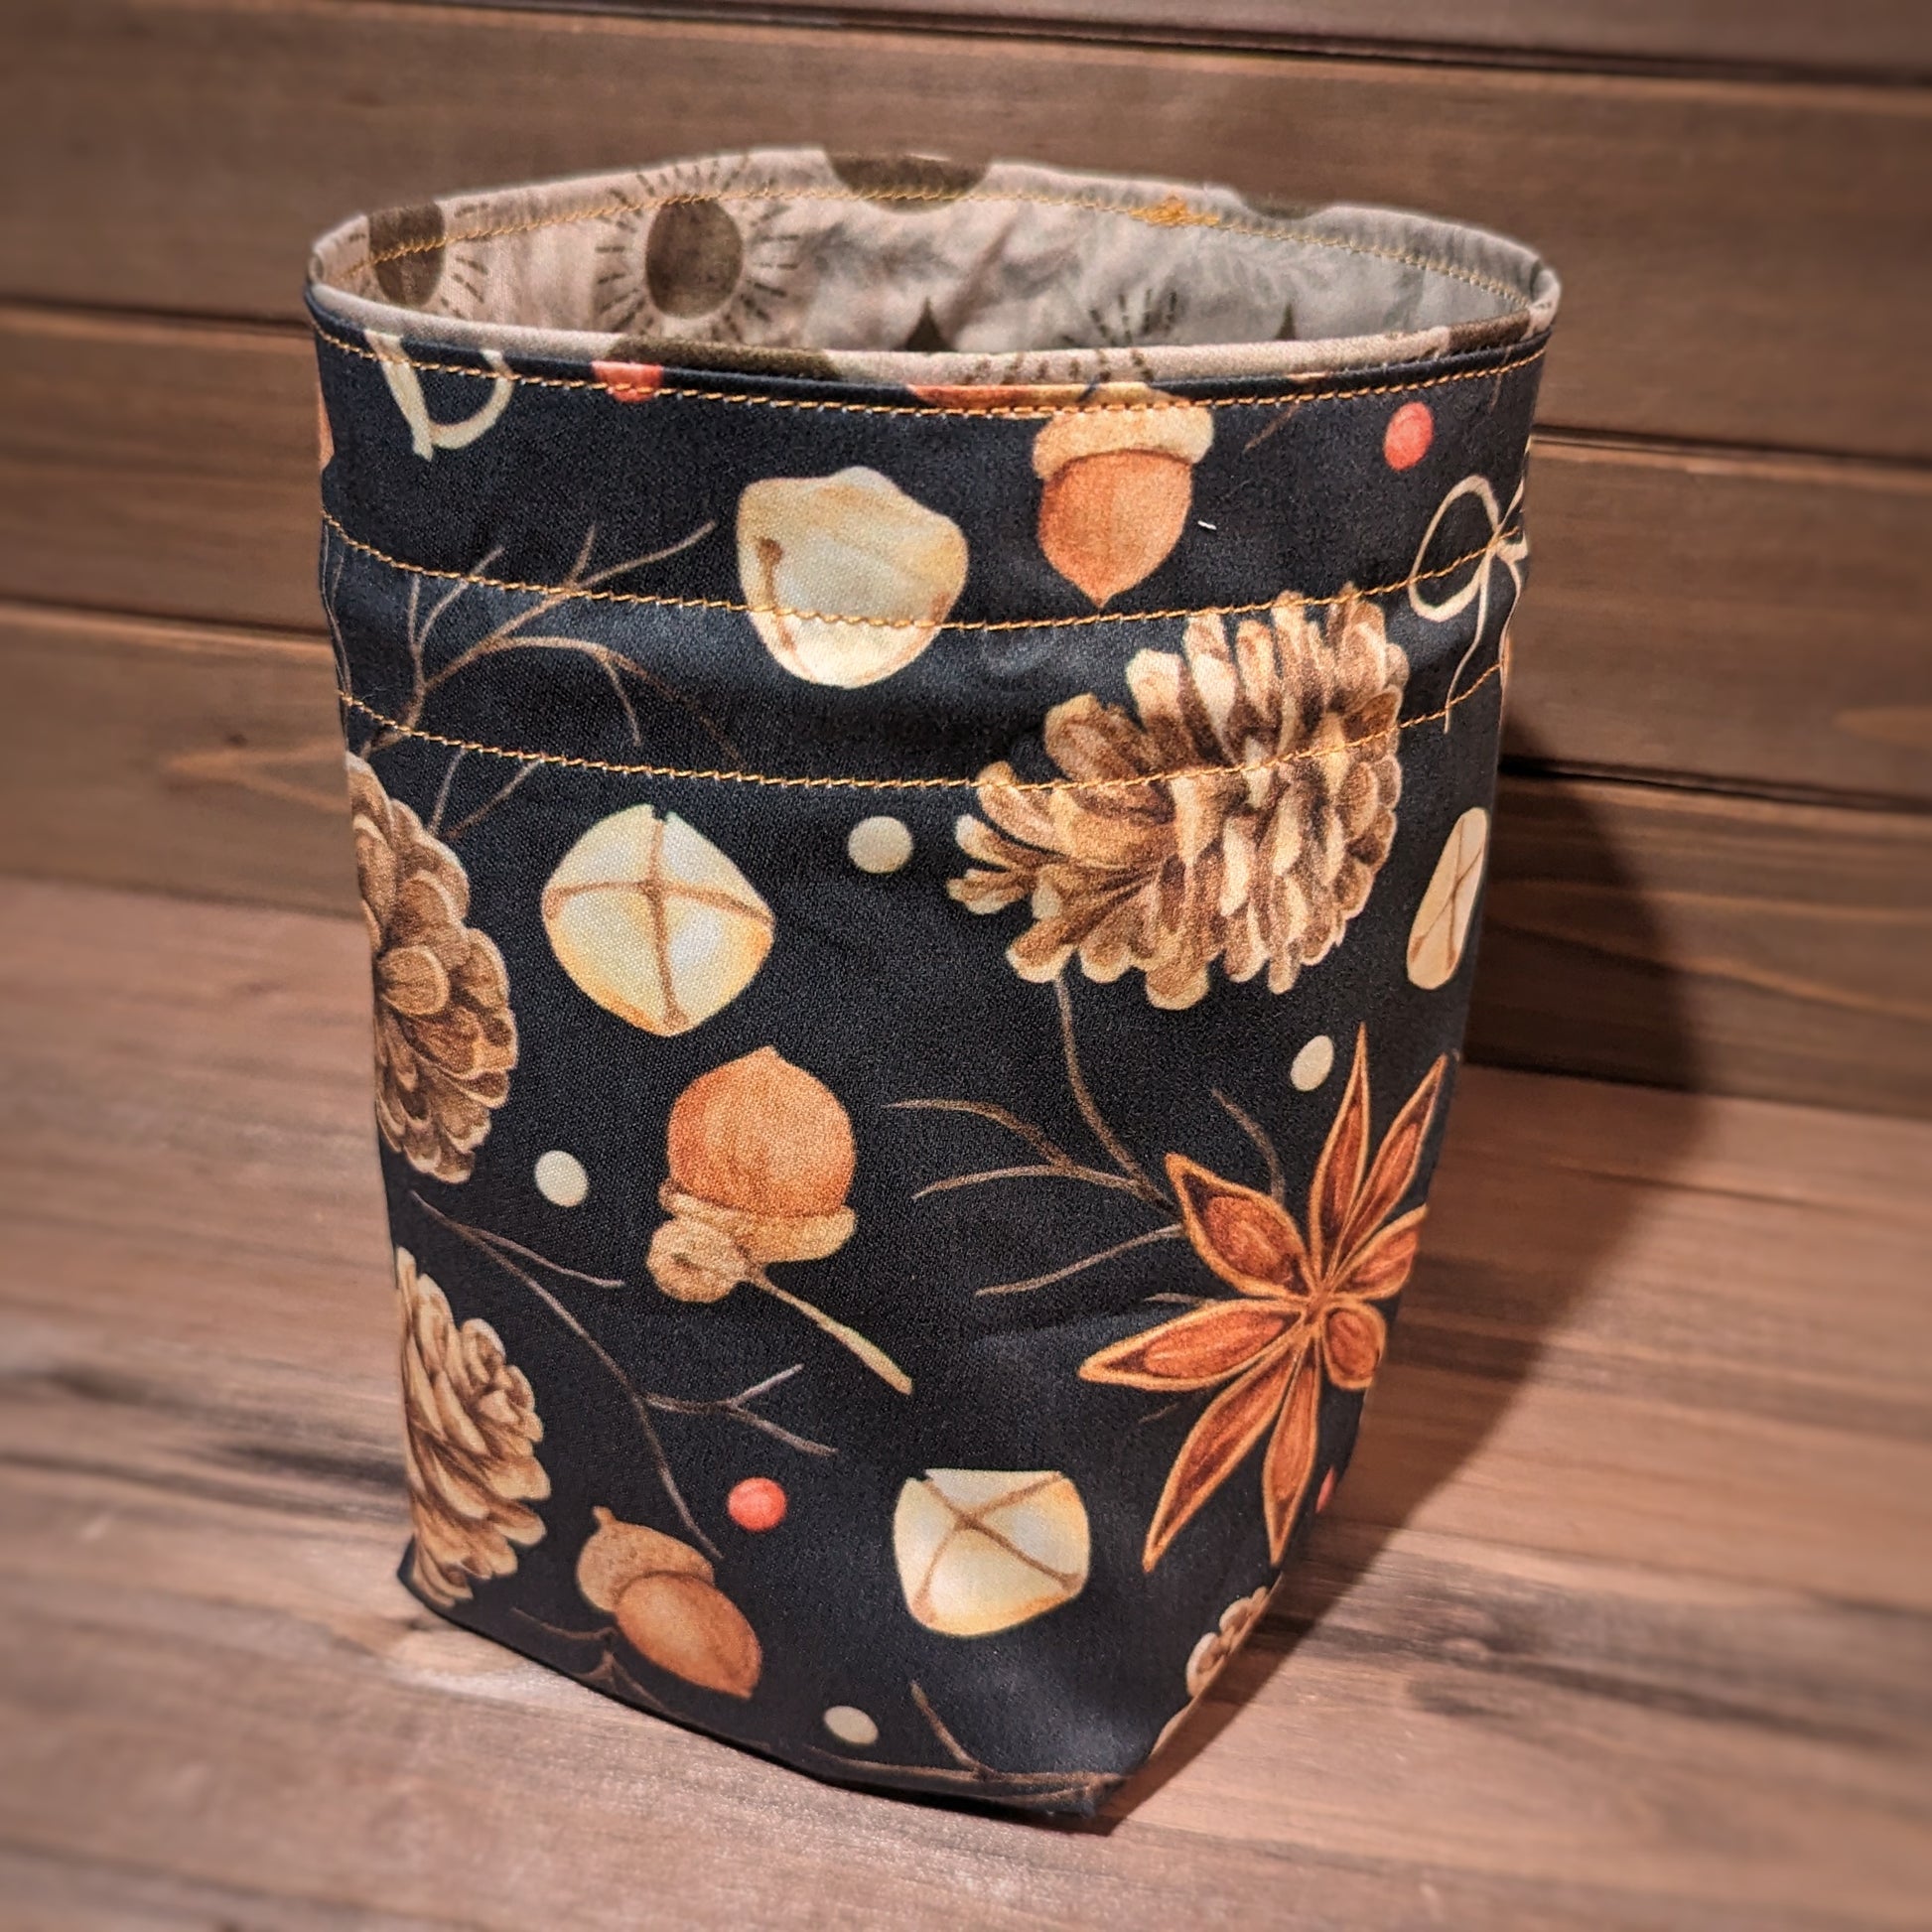 A drawstring bag has pinecone, acorn, star anise, bells, berry, and stick print fabric outside, gold stitching, and sun, moon, and star liner.